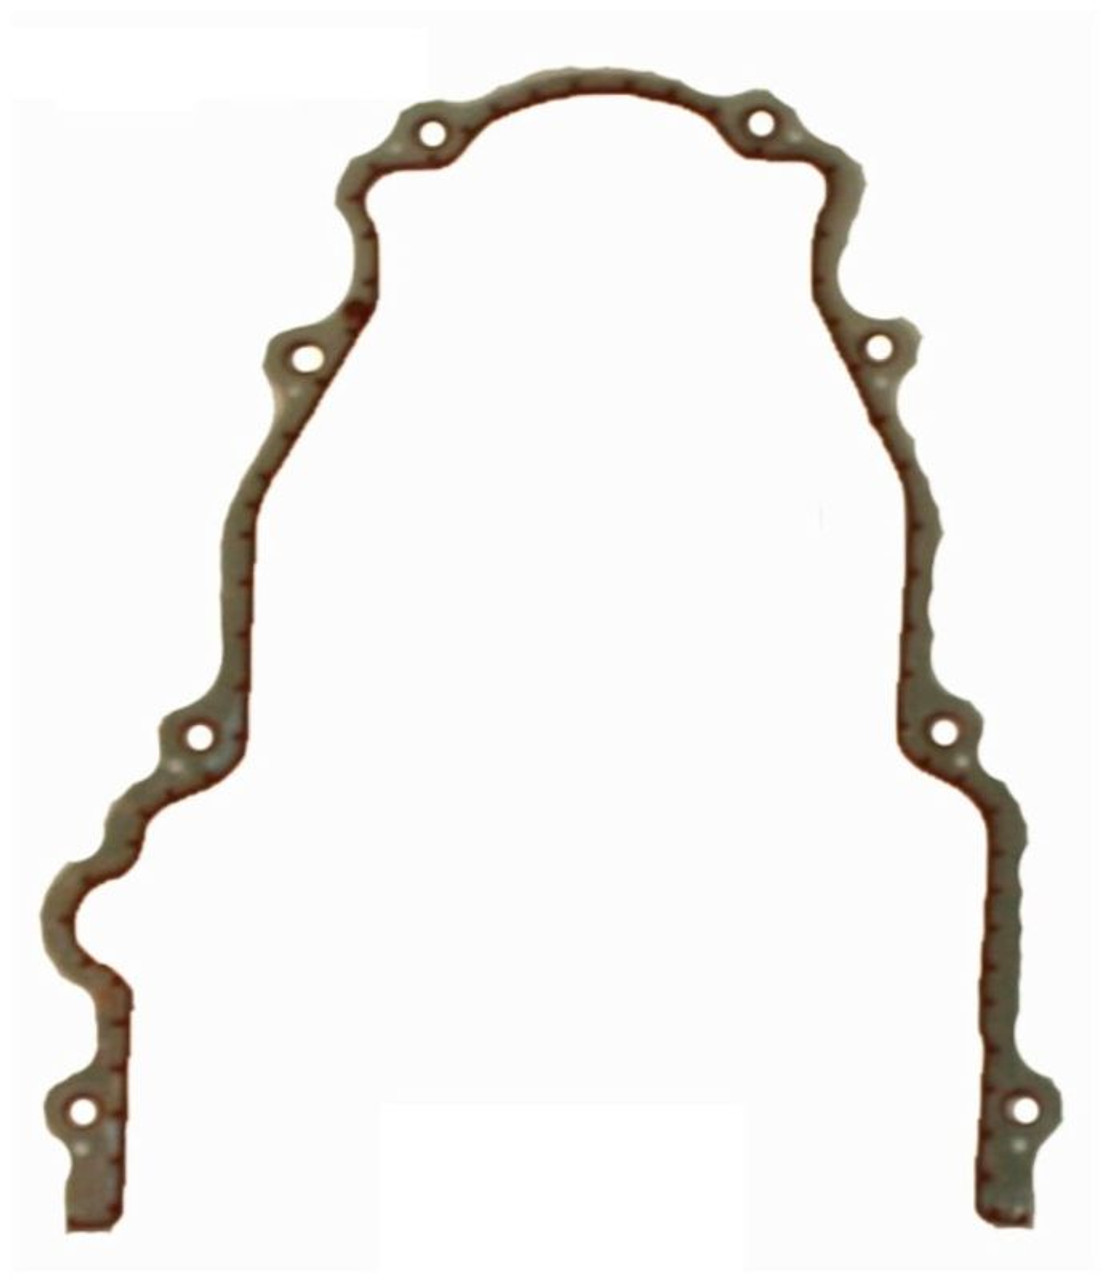 2010 Chevrolet Express 2500 4.8L Engine Timing Cover Gasket TCG293-A -642